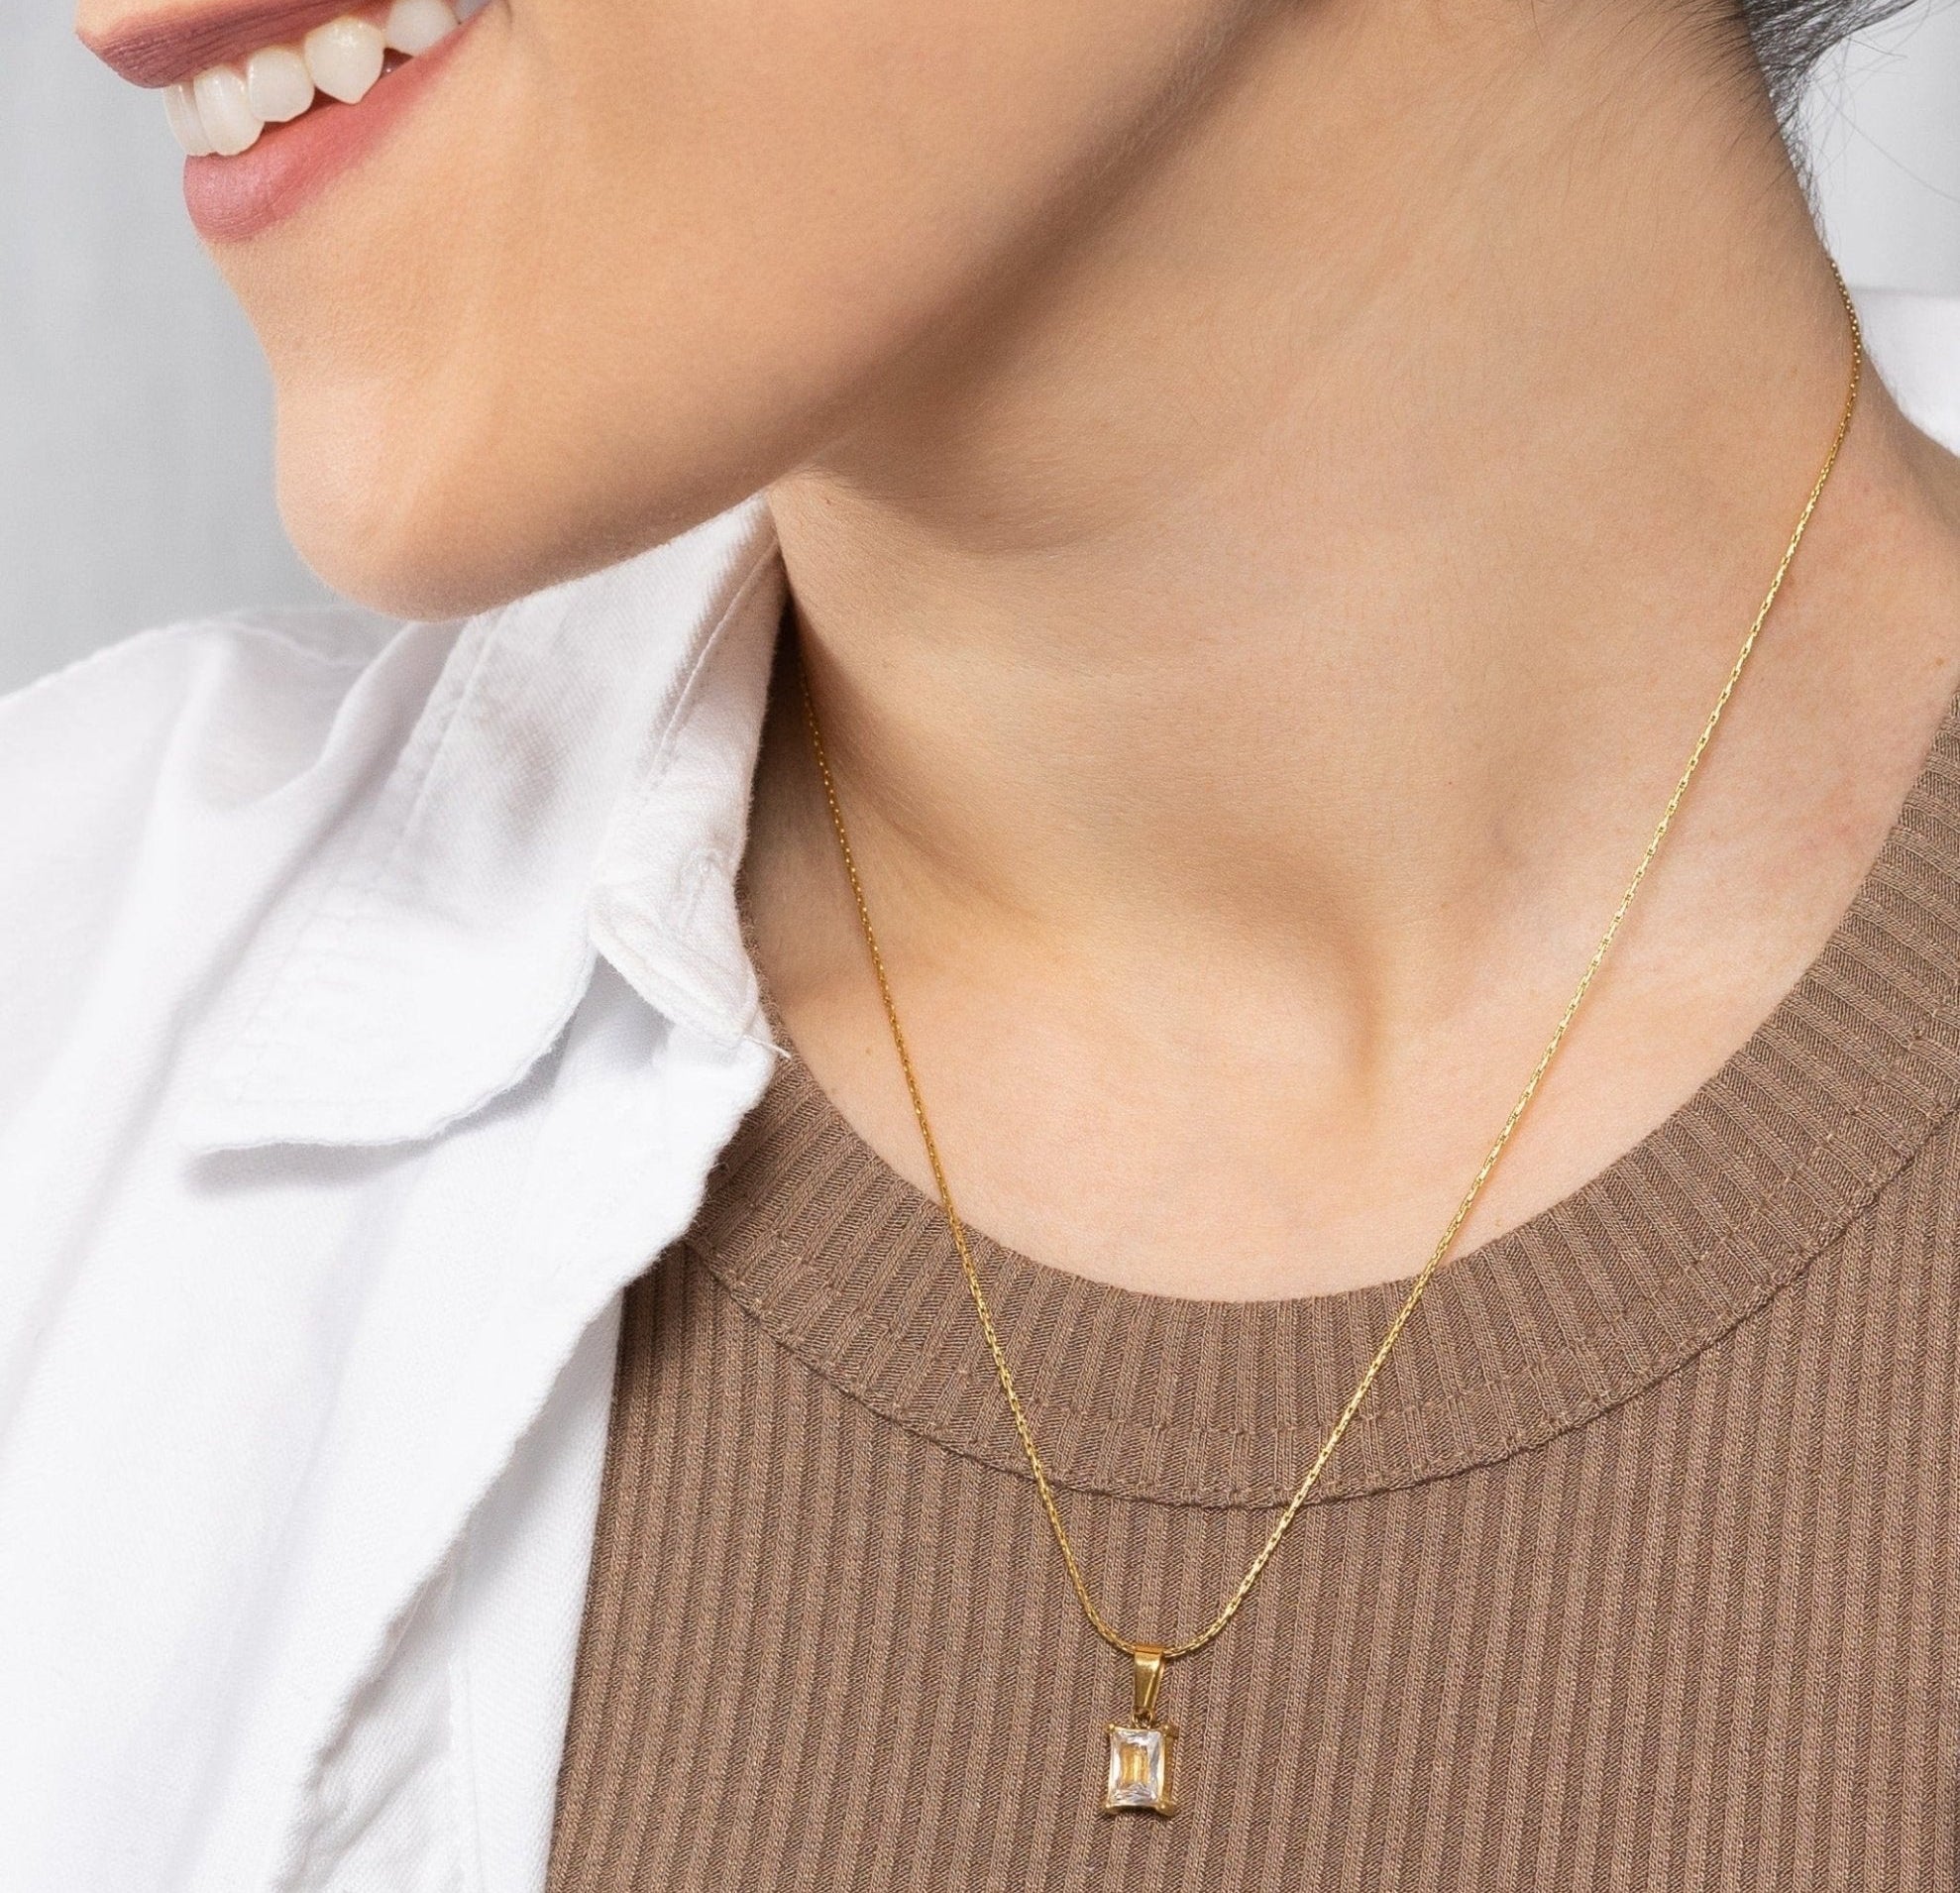 Esther Zirconia Pendant Gold Chain by Koréil Jewelry